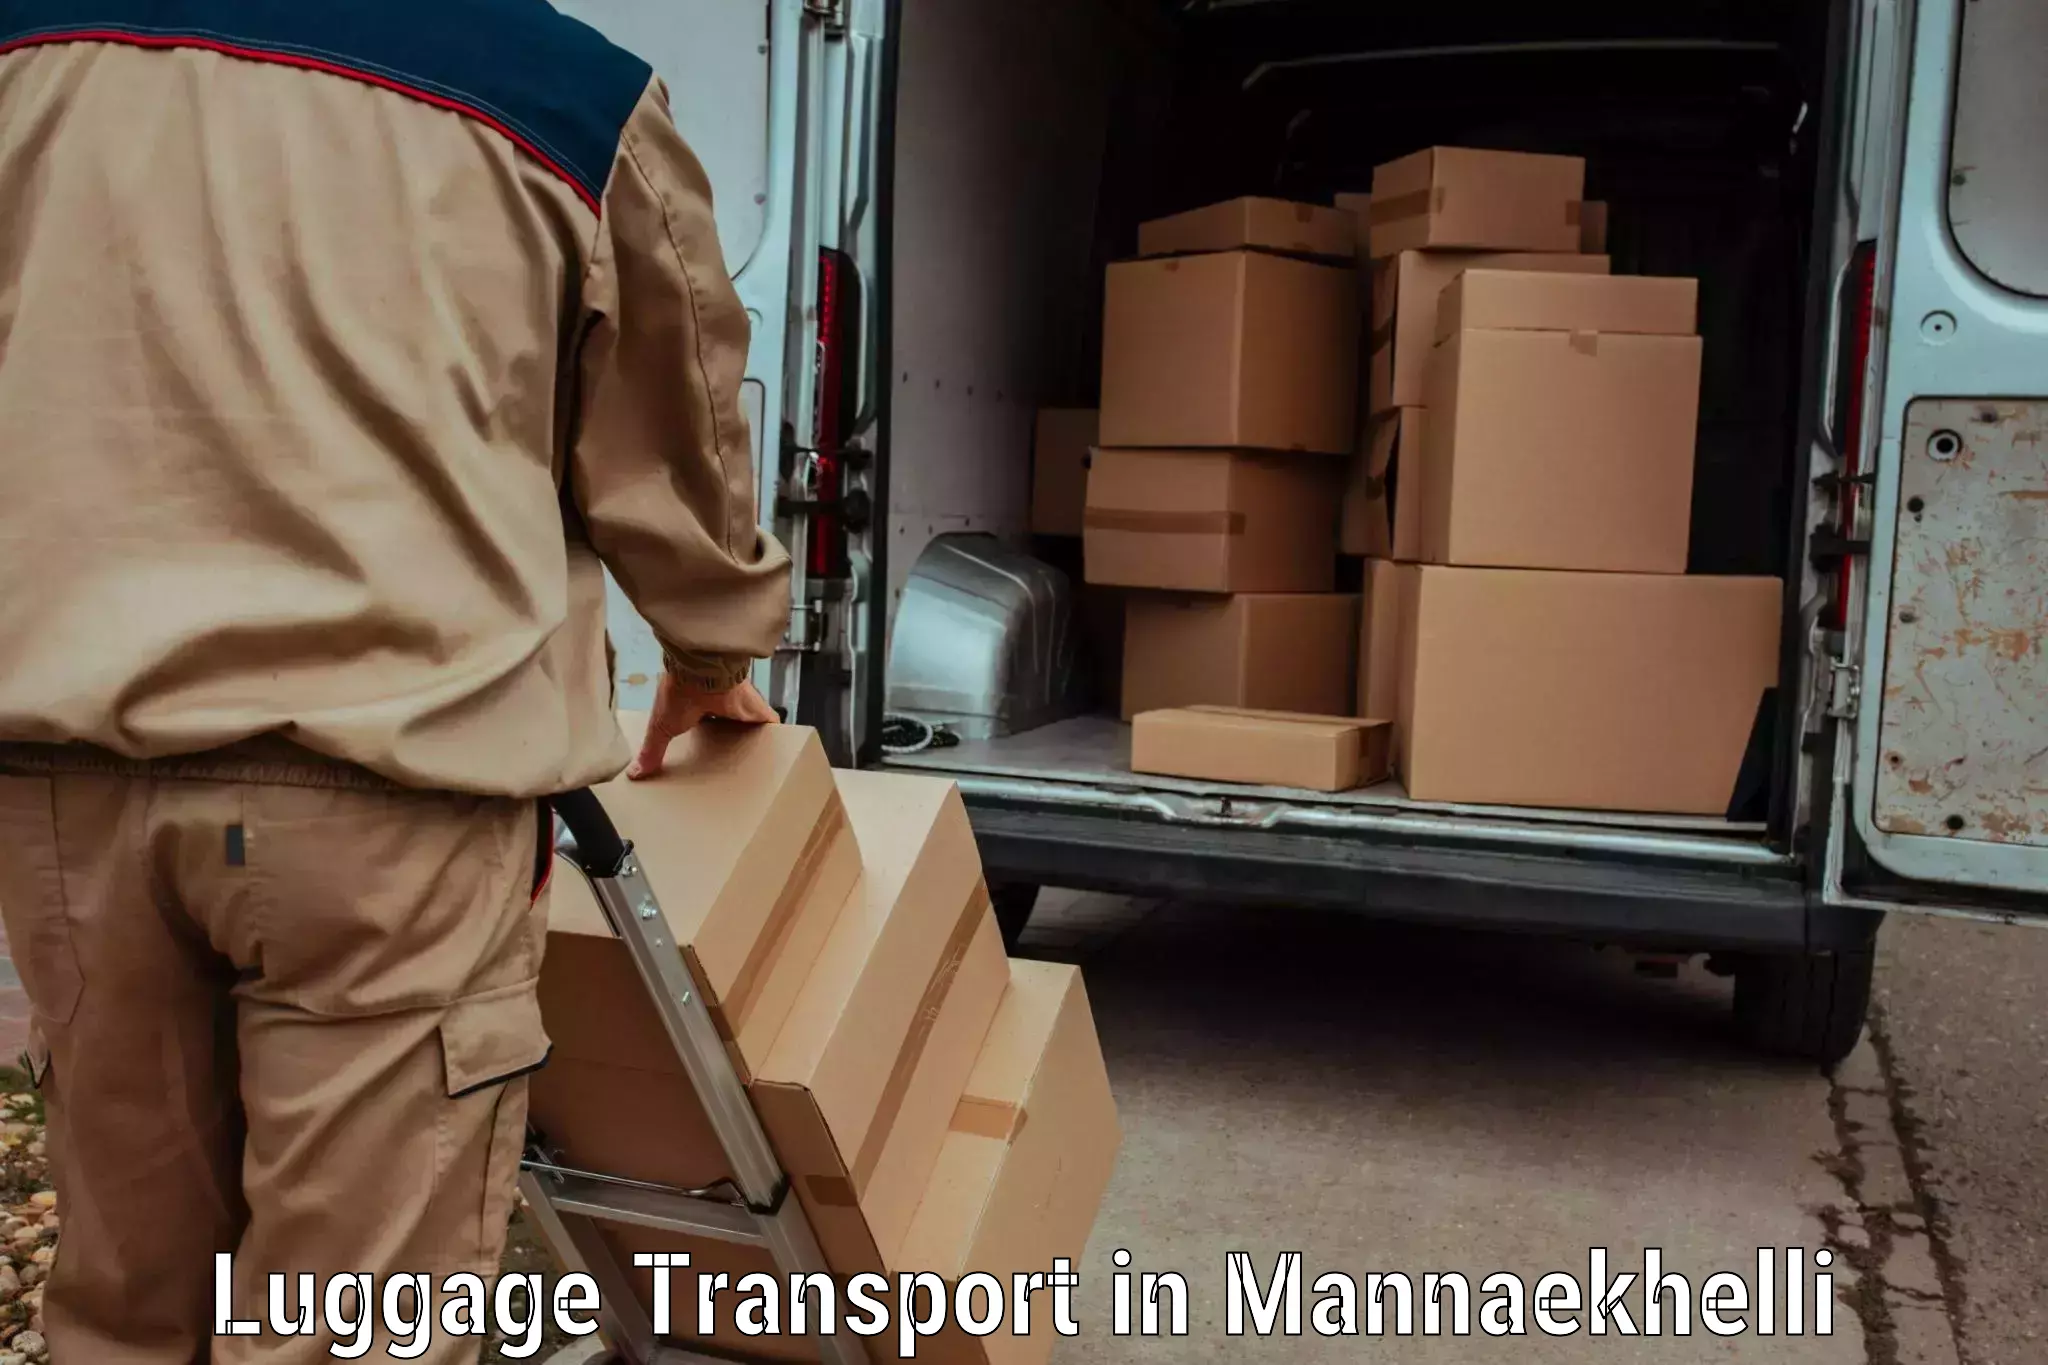 Fast track baggage delivery in Mannaekhelli